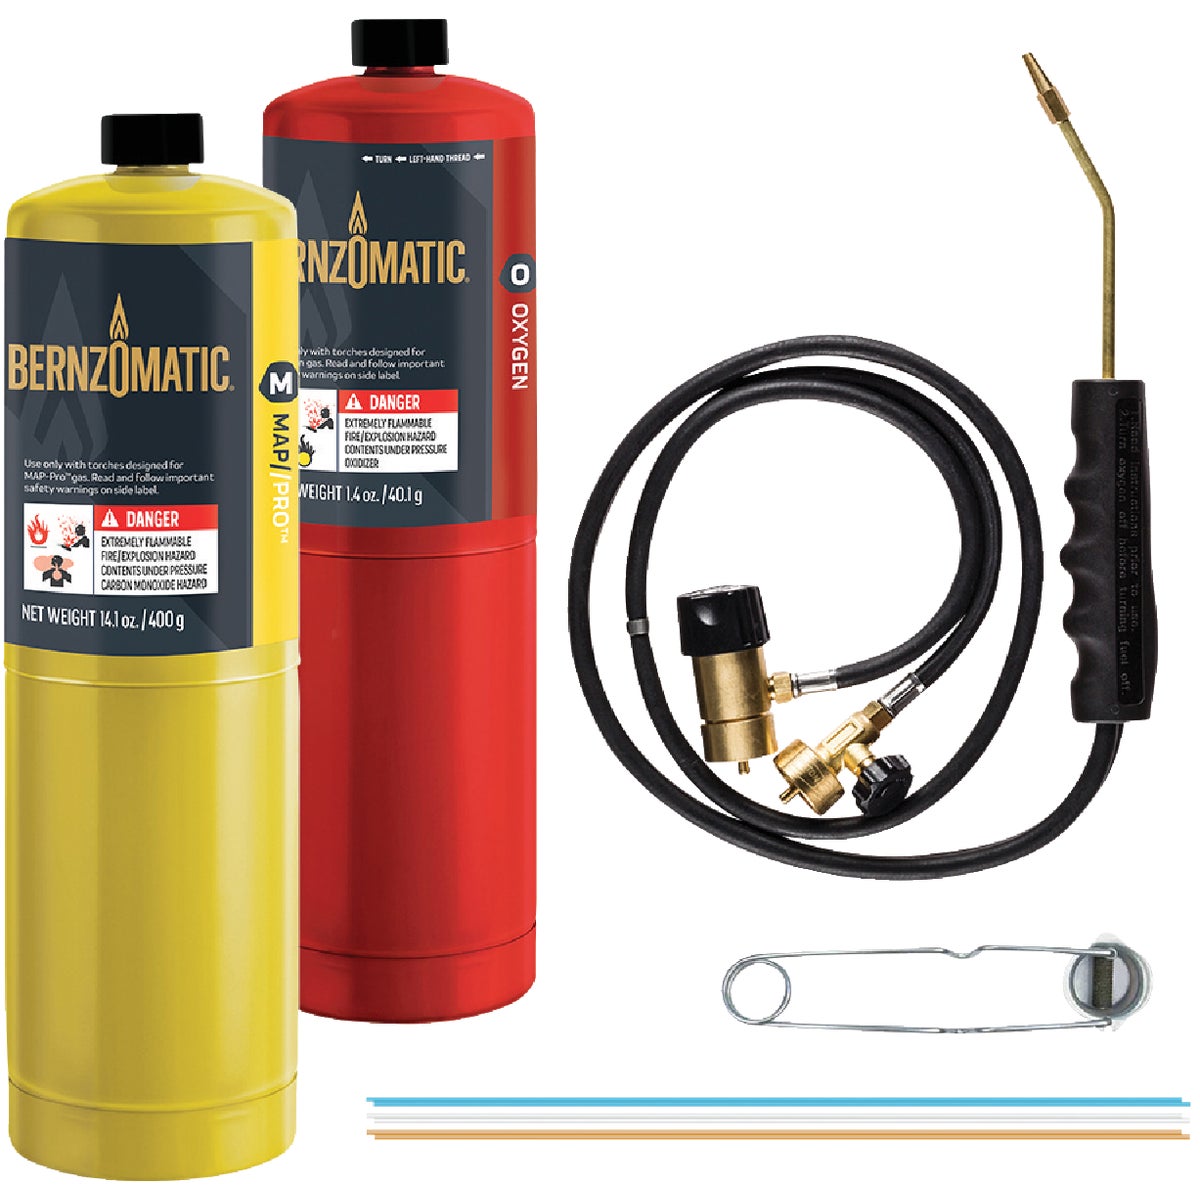 Item 314943, The Bernzomatic Brazing Torch Kit has an adjustable precision flame and 